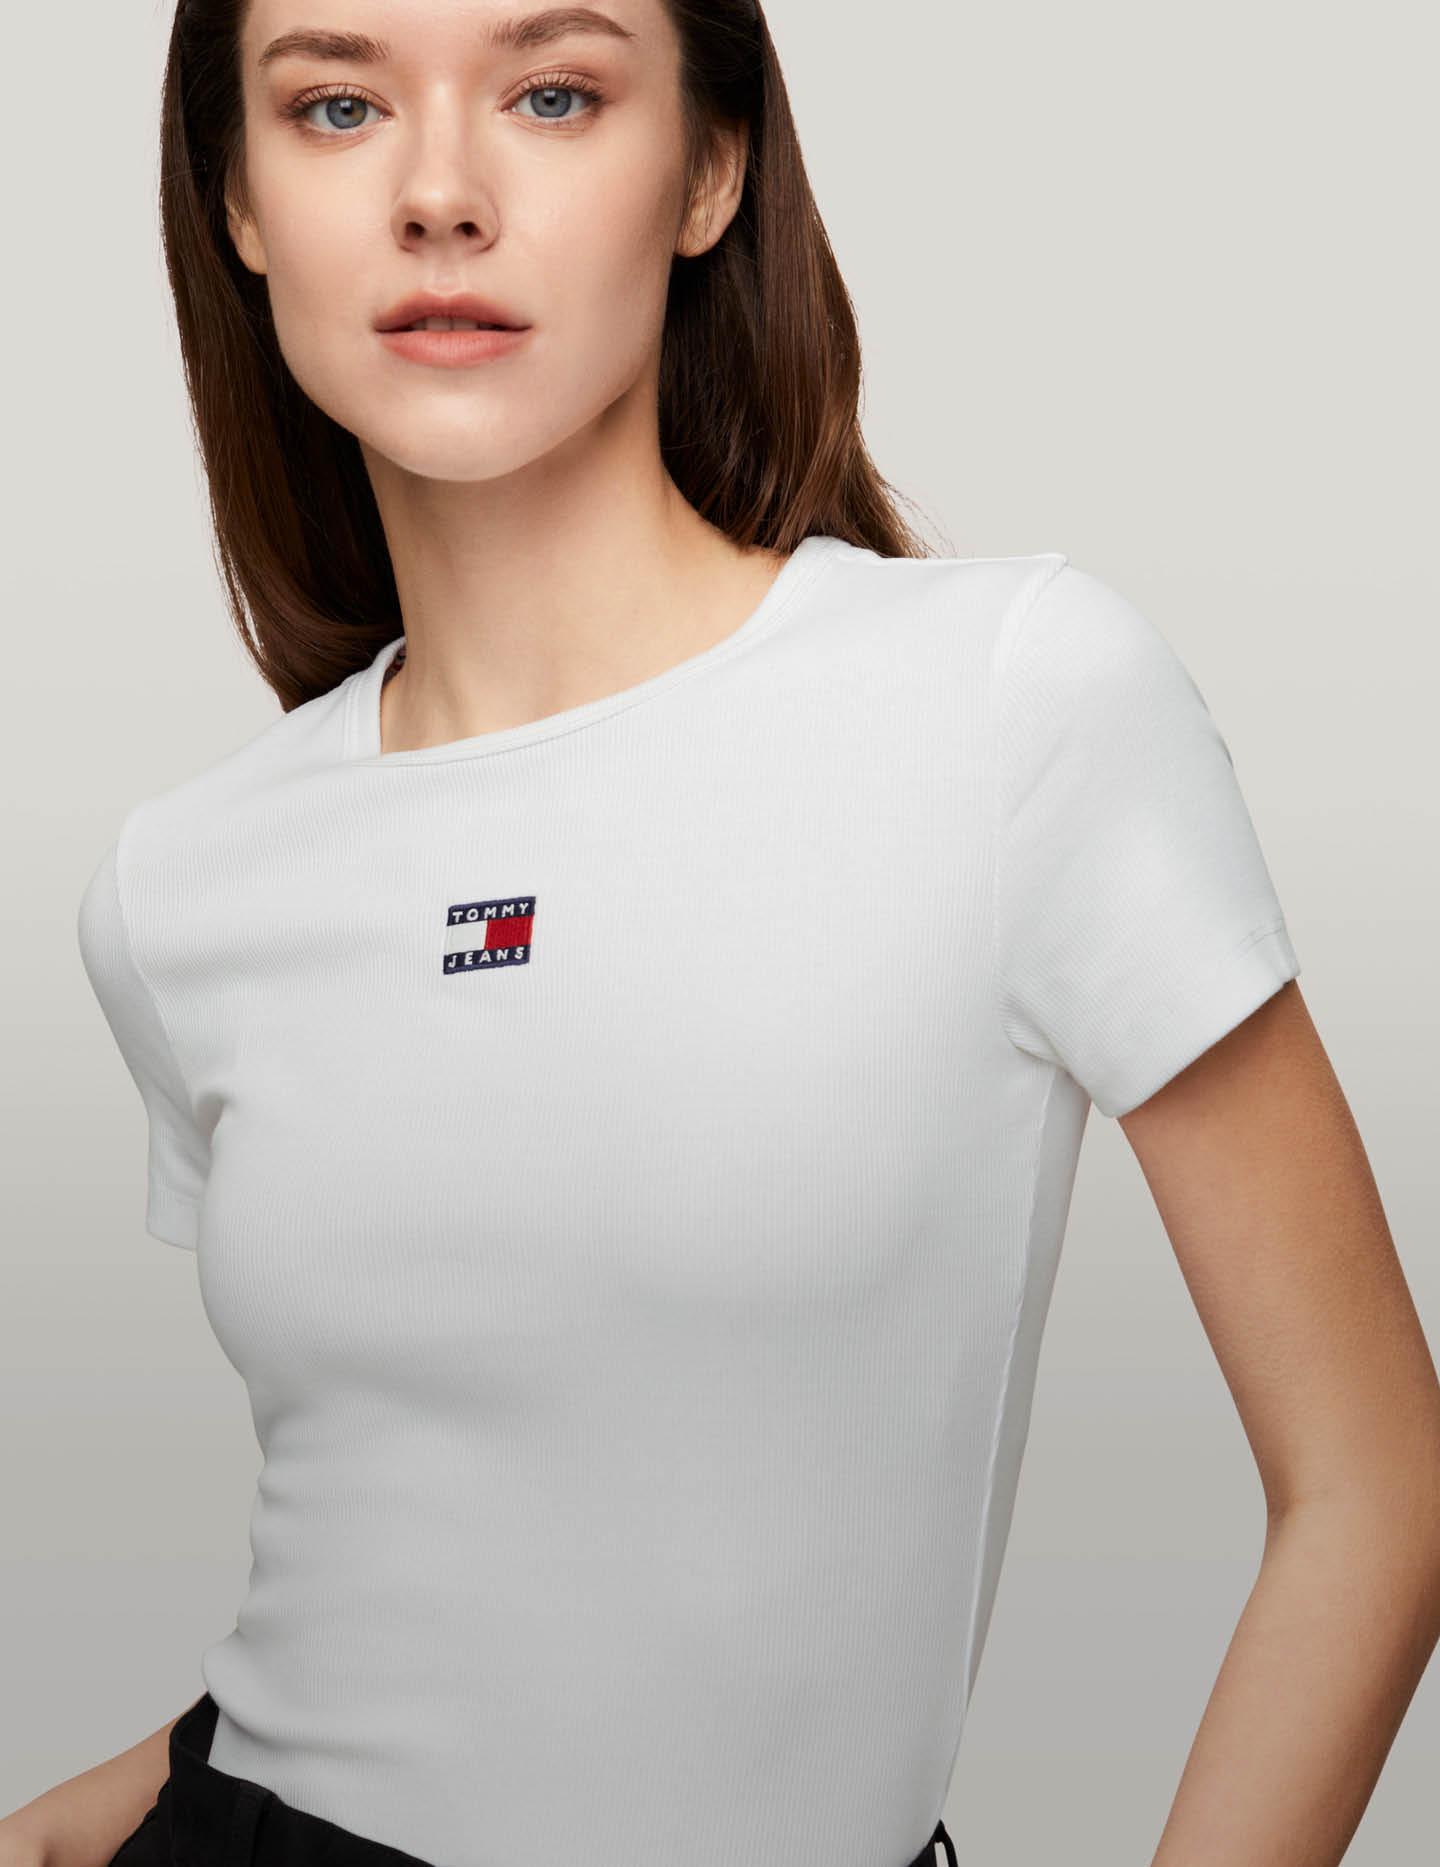 Tommy Hilfiger Women's Sale Tees Up to 40% Off